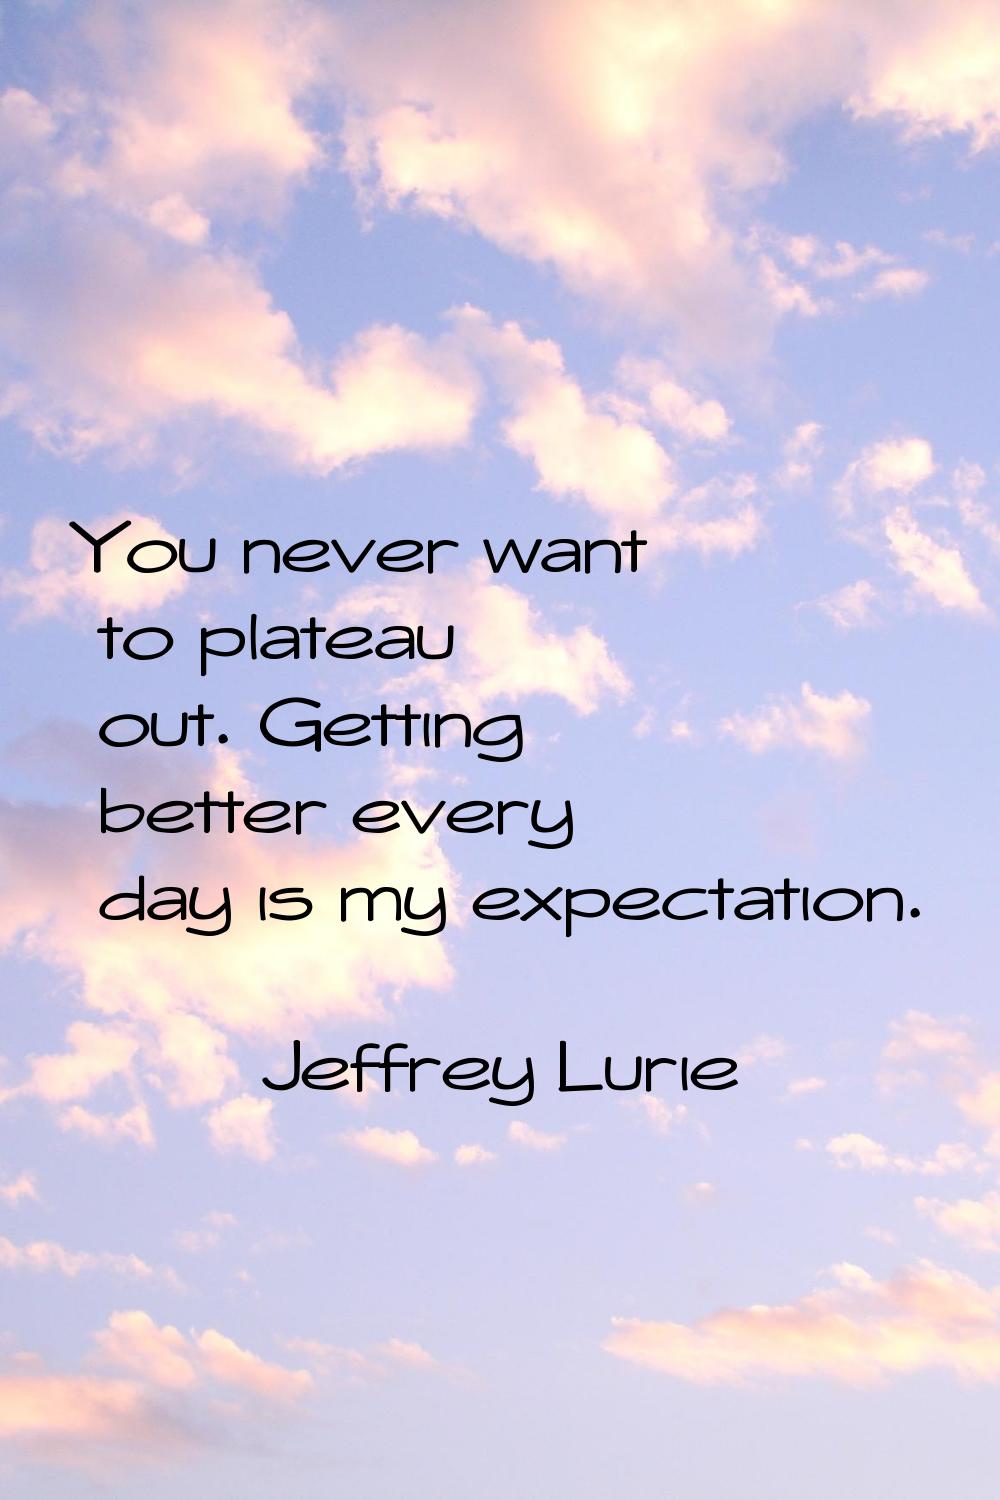 You never want to plateau out. Getting better every day is my expectation.